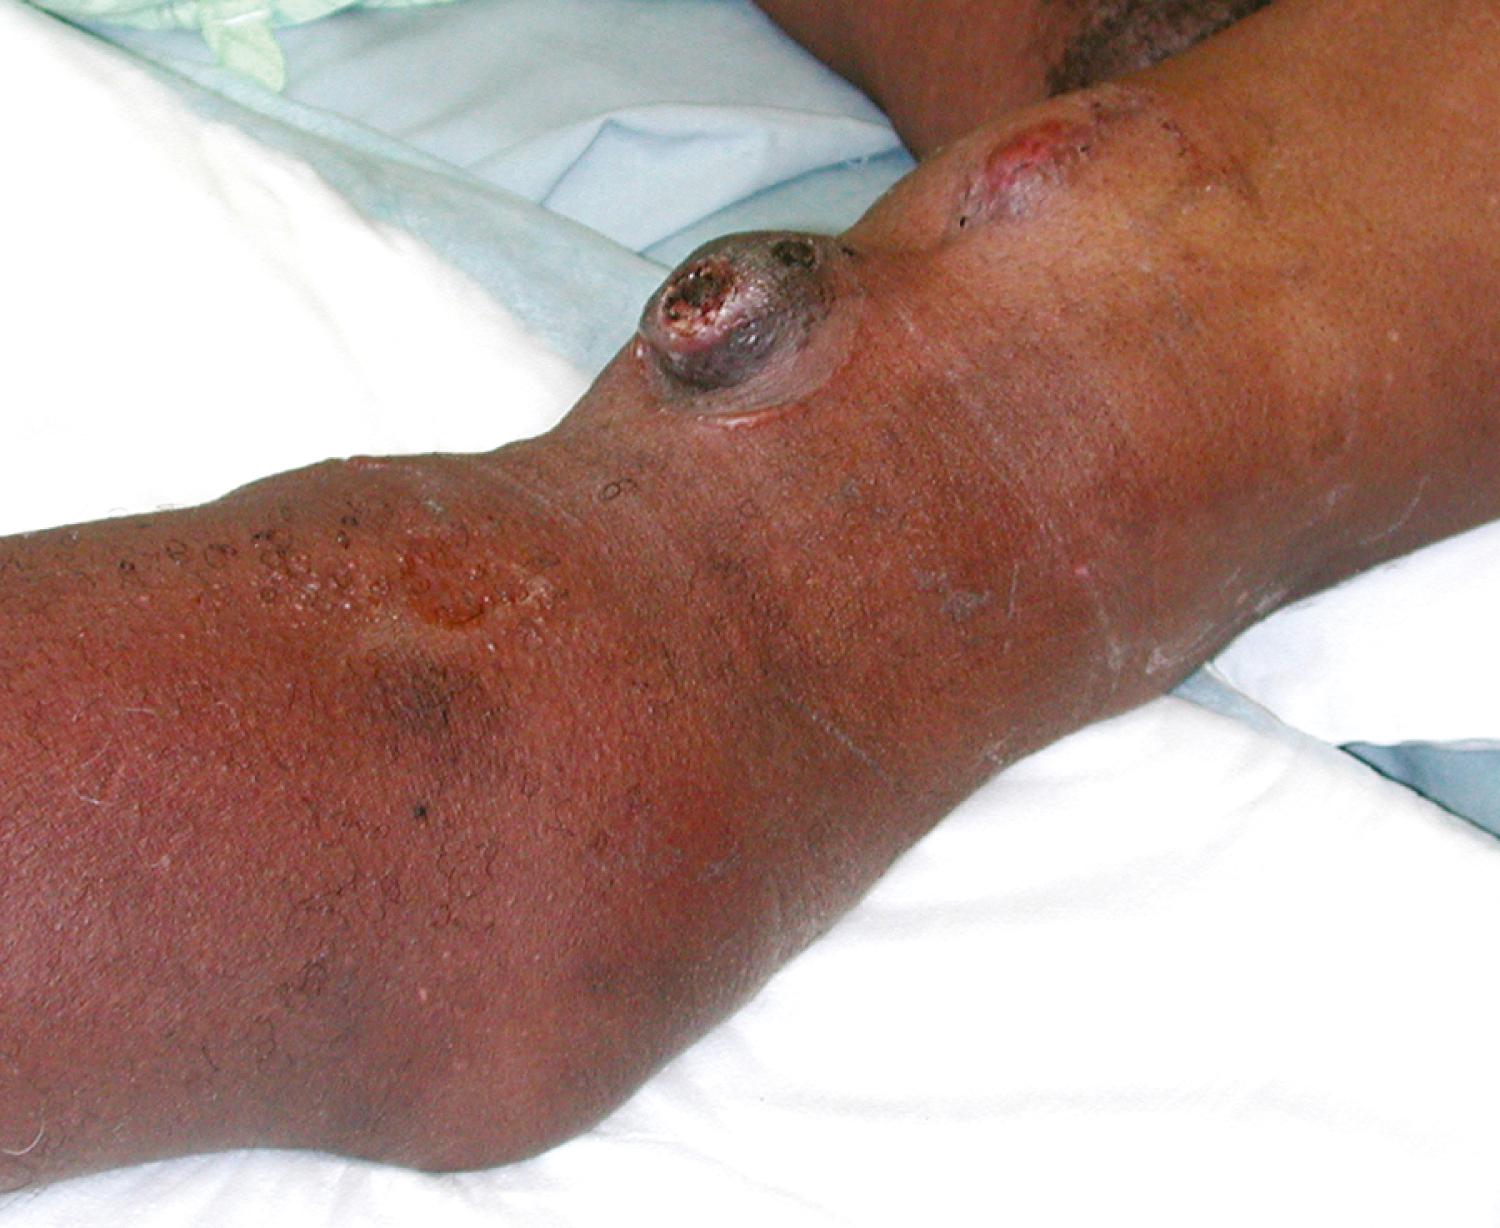 Figure 177.3, Repeated cannulation at the same site resulted in a pseudoaneurysm associated with infiltration and ulceration.